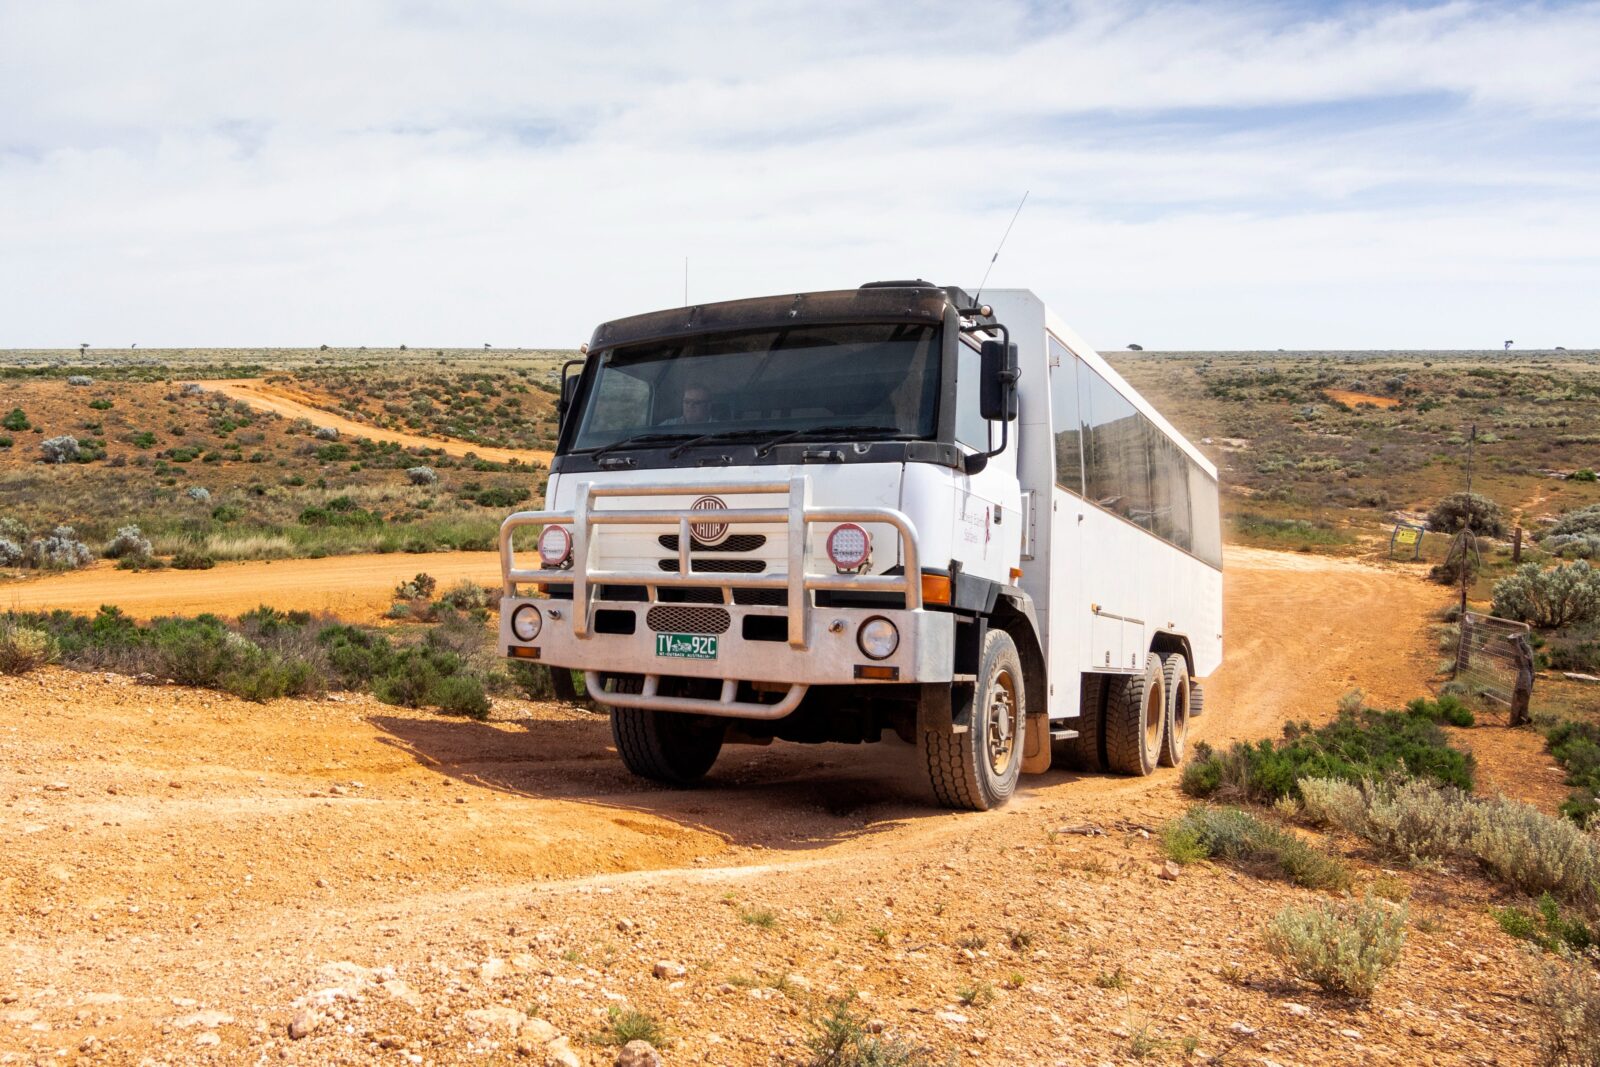 6WD coach tour vehicle driving on dirt road